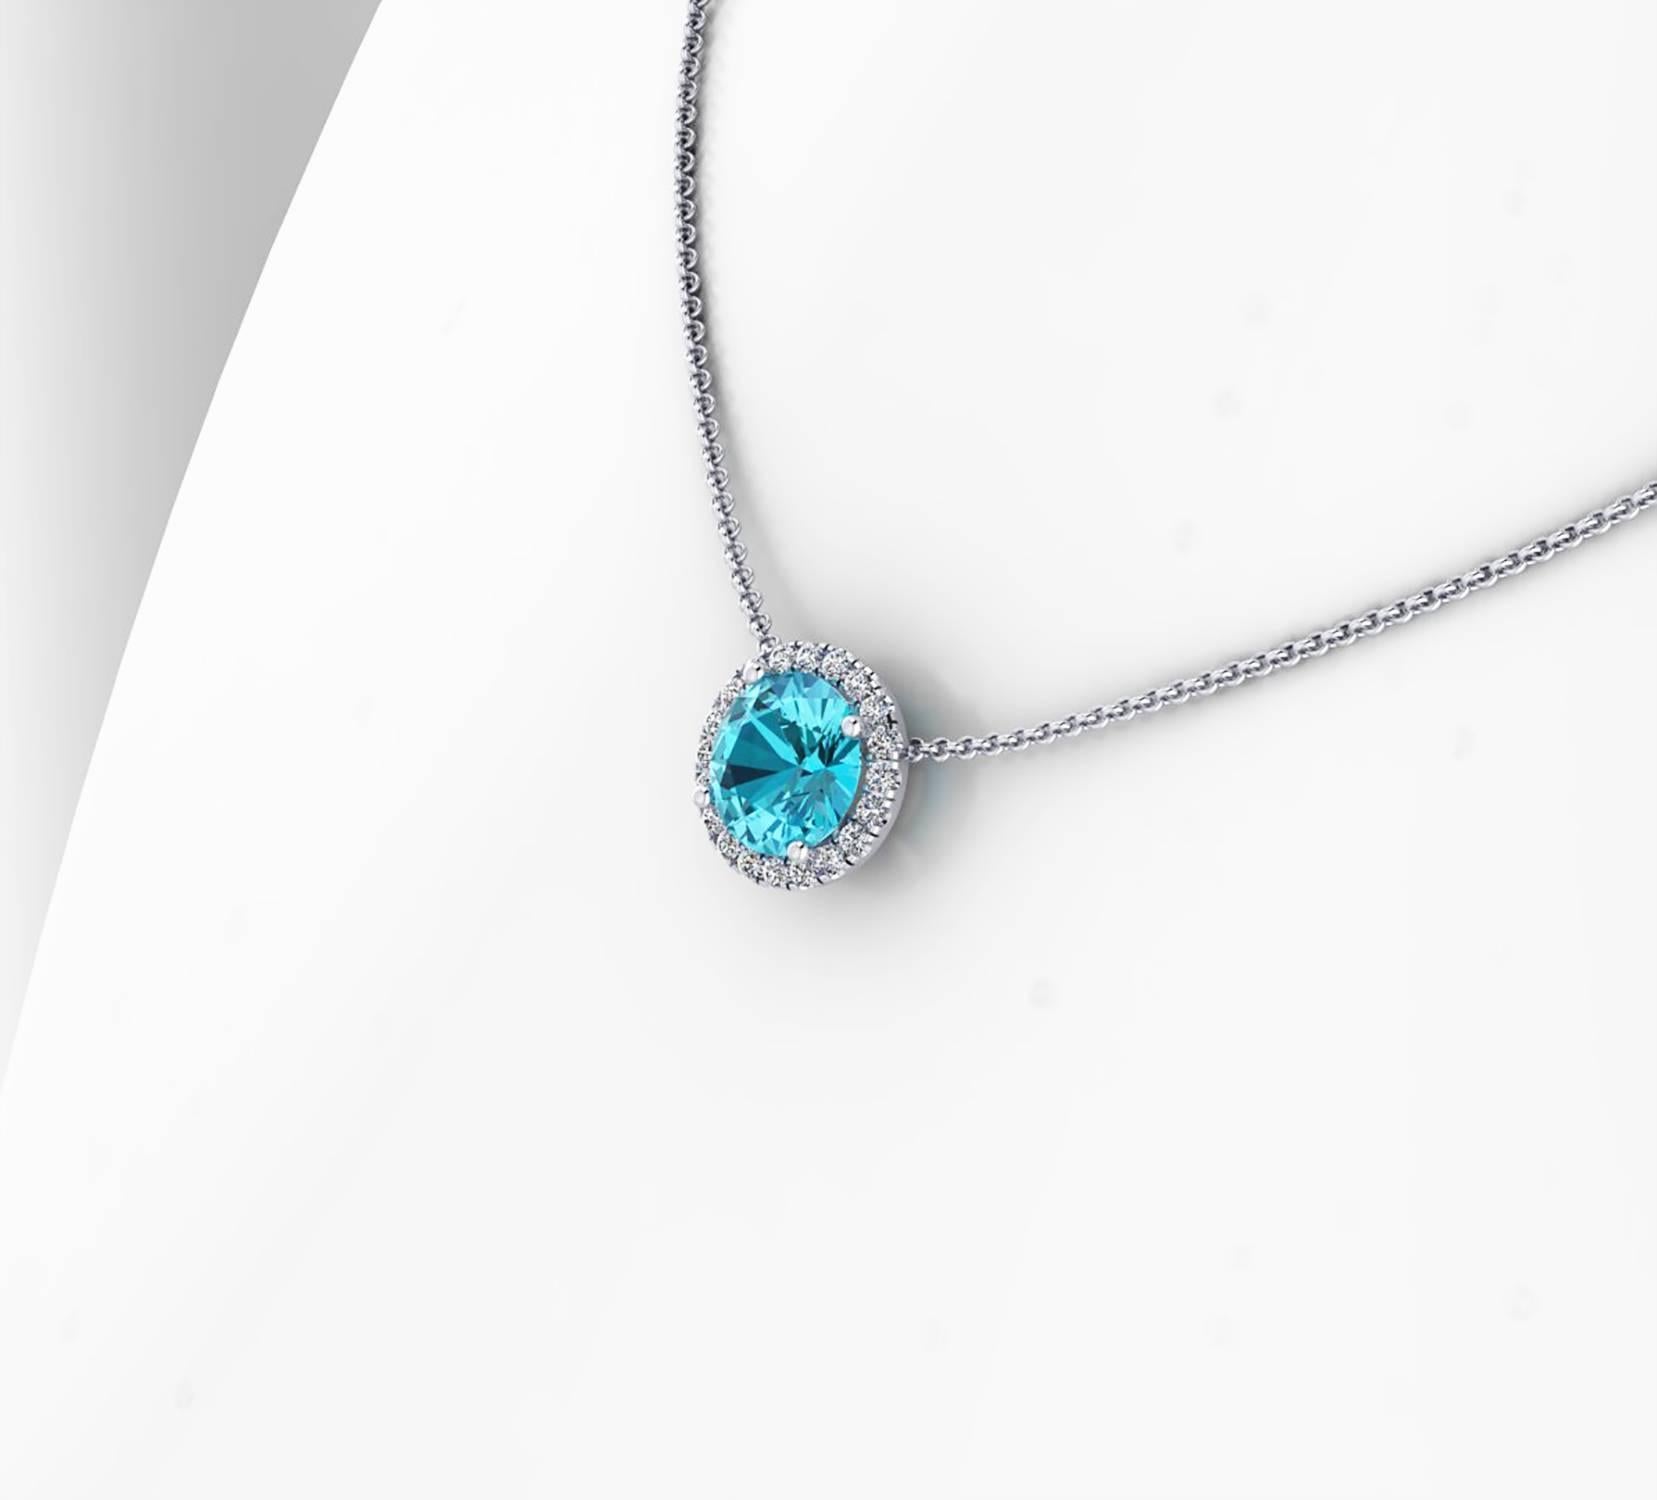 Ferrucci 1.73 carat Natural Blue Apatite and bright white Diamonds halo, hand set for a total carat weight of 0.16 carats.

The necklace is made in 18k white gold, hand crafted in New York City by master jeweler Francesco Ferrucci, with a 1.1mm 18k